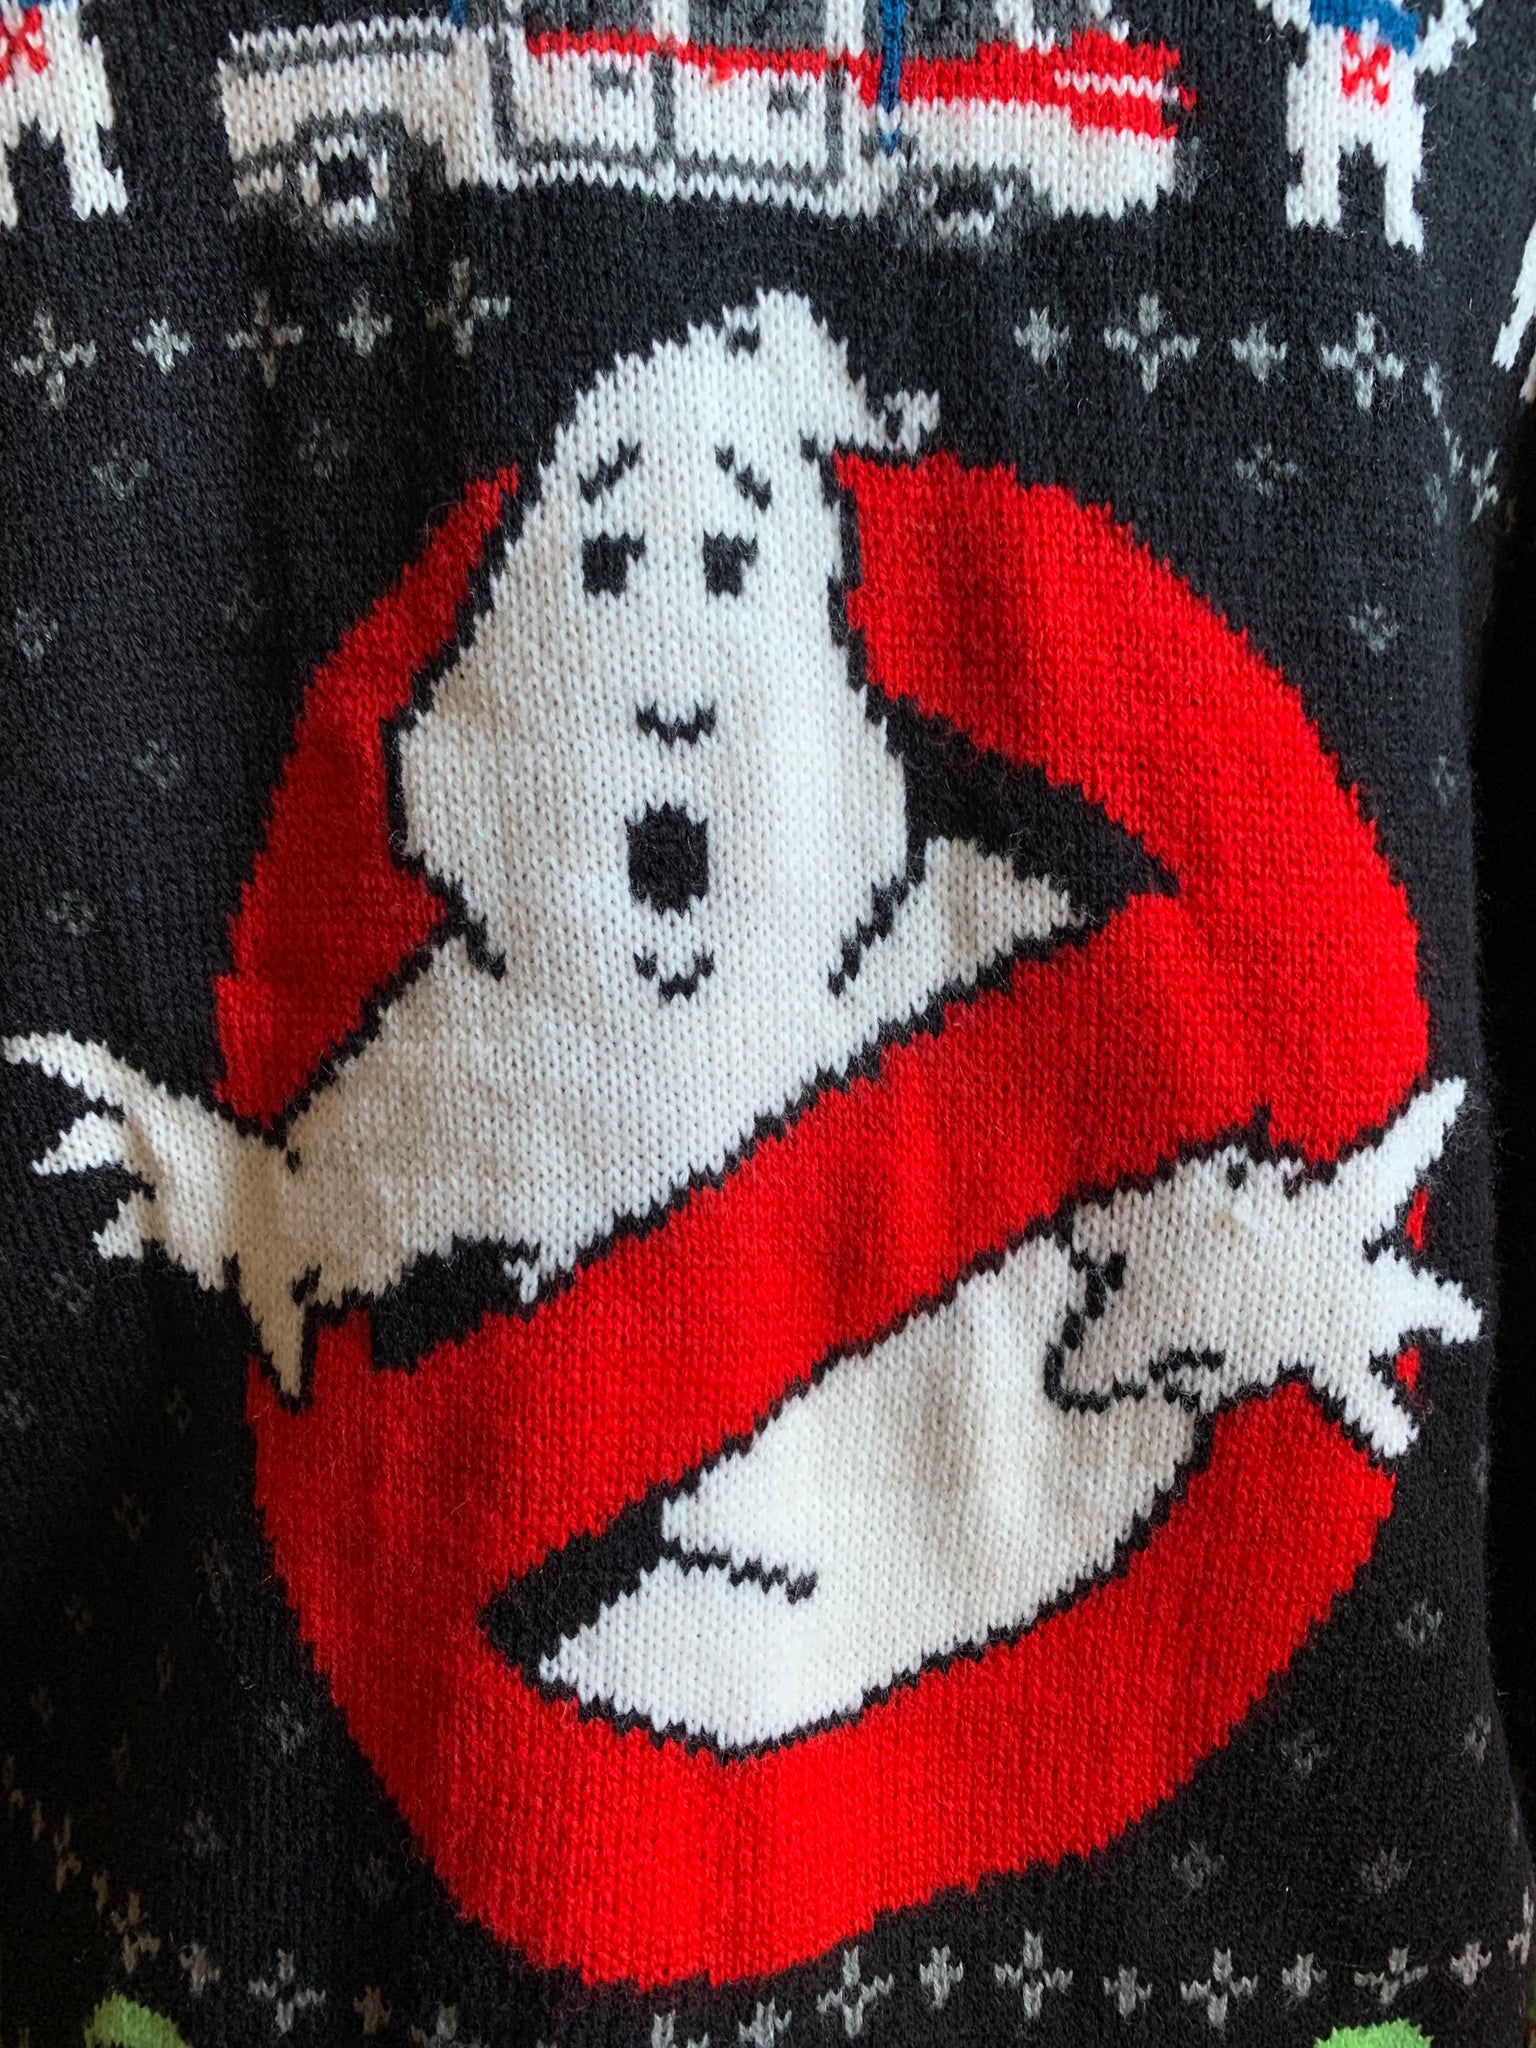 Ghostbusters Knit Cardigan Sweater